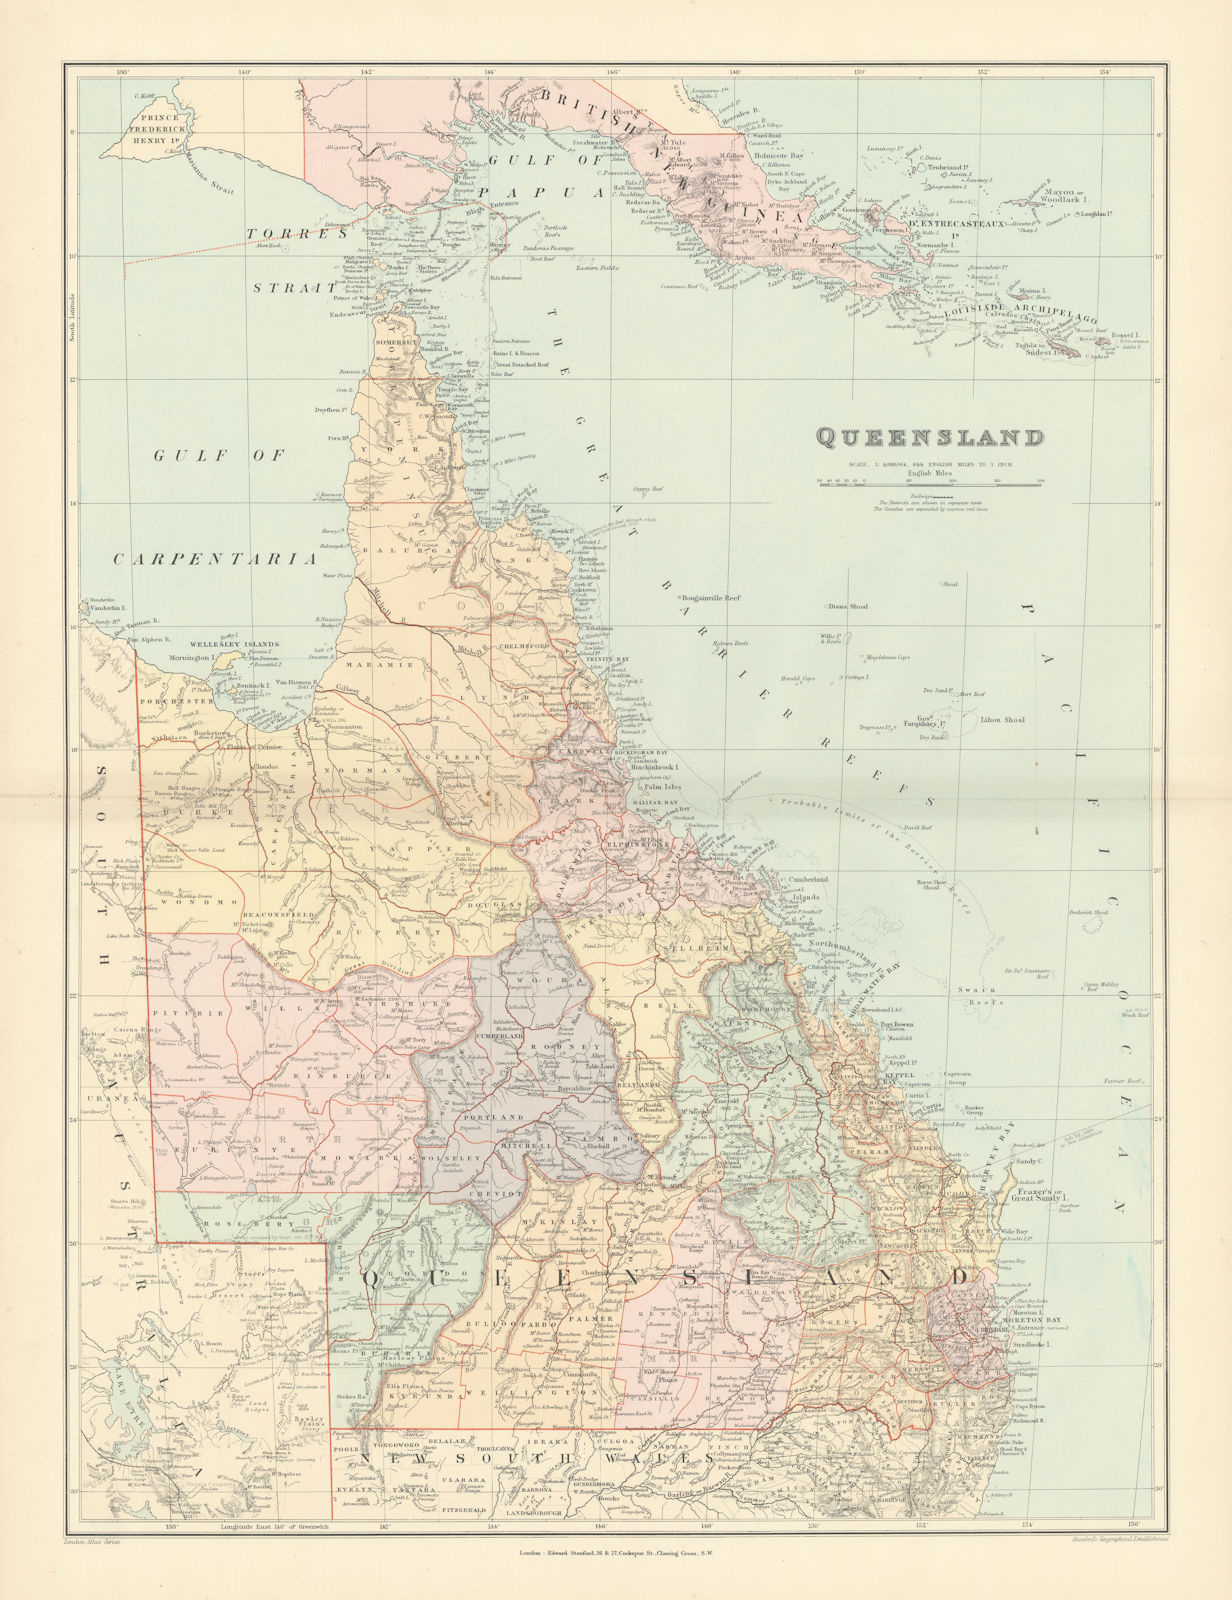 Associate Product Queensland. British New Guinea. Great Barrier Reef. 68x52cm. STANFORD 1896 map